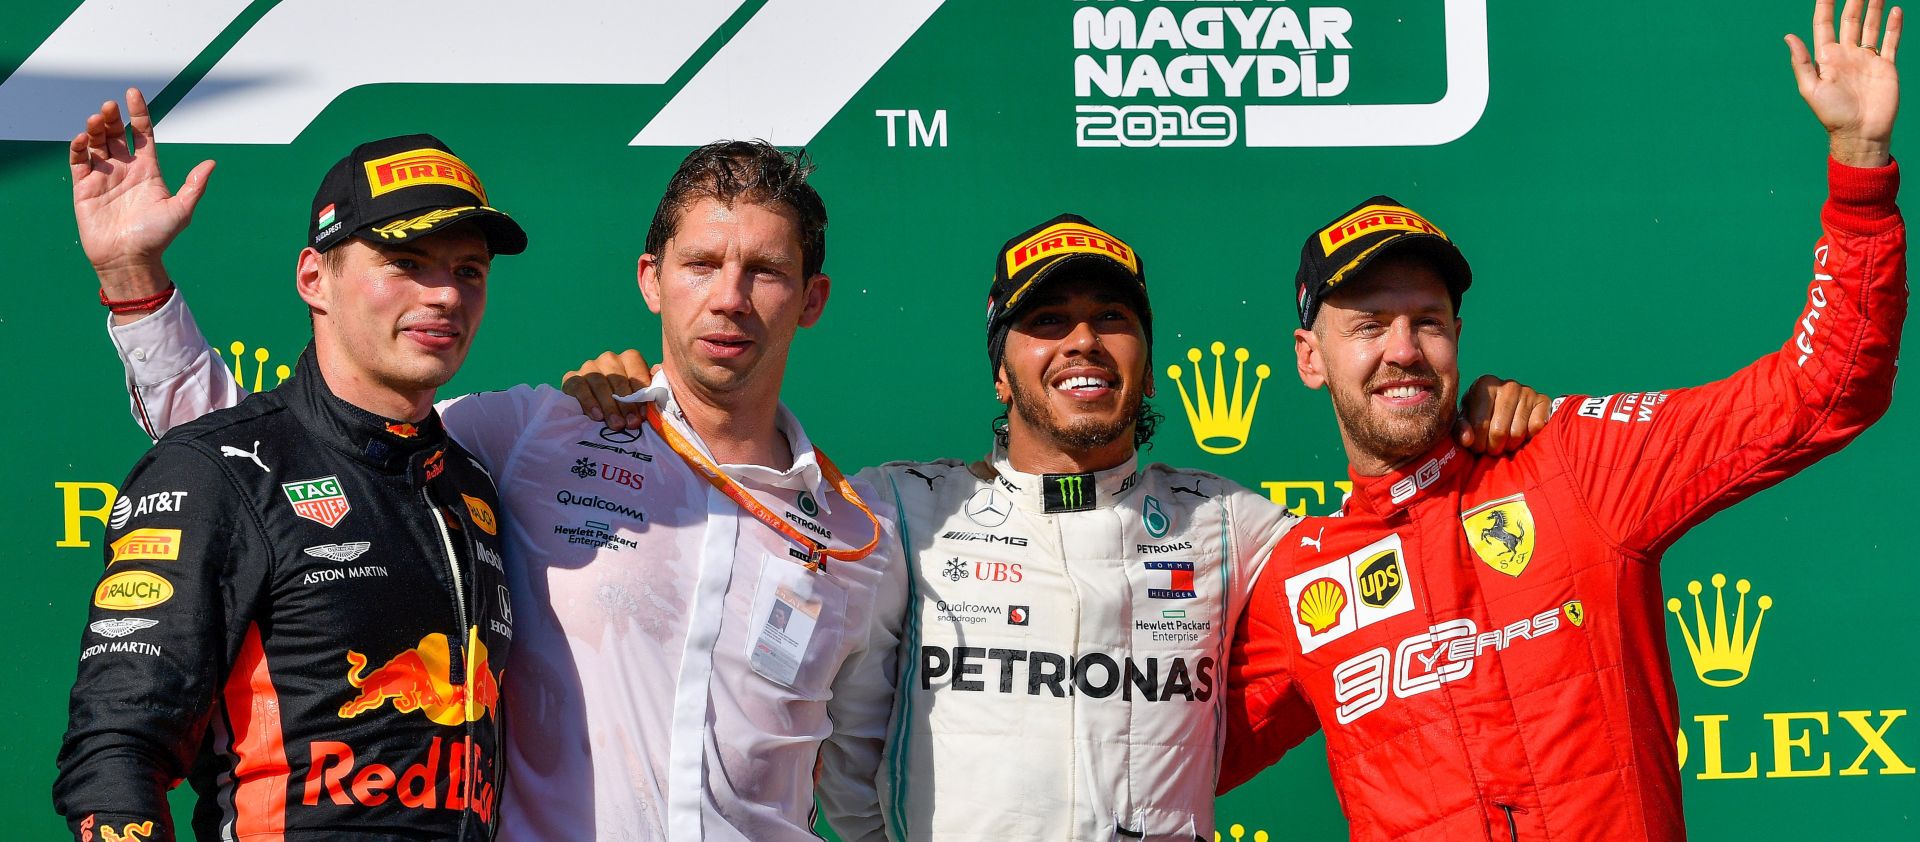 epa08394955 (FILE) - Second placed Dutch Formula One driver Max Verstappen of Red Bull, Chief Strategist of Mercedes team James Vowles, winner British Lewis Hamilton of Mercedes and third placed German Sebastian Vettel of Ferrari (L-R) celebrate on the podium during the award ceremony of the Hungarian Formula One Grand Prix at the Hungaroring circuit, in Mogyorod, Hungary, 04 August 2019  (re-issued on 01 May 2020). On 01 May 2020 race officials announced that, if the Hungarian Formula One Grand Prix scheduled on 02 Agust 2020 will be confirmed, than it will take place behind closed doors and without fans due to the ongoing COVID-19 coronavirus pandemic.  EPA/Zsolt Czegledi HUNGARY OUTHUNGARY OUTHUNGARY OUT *** Local Caption *** 55378621